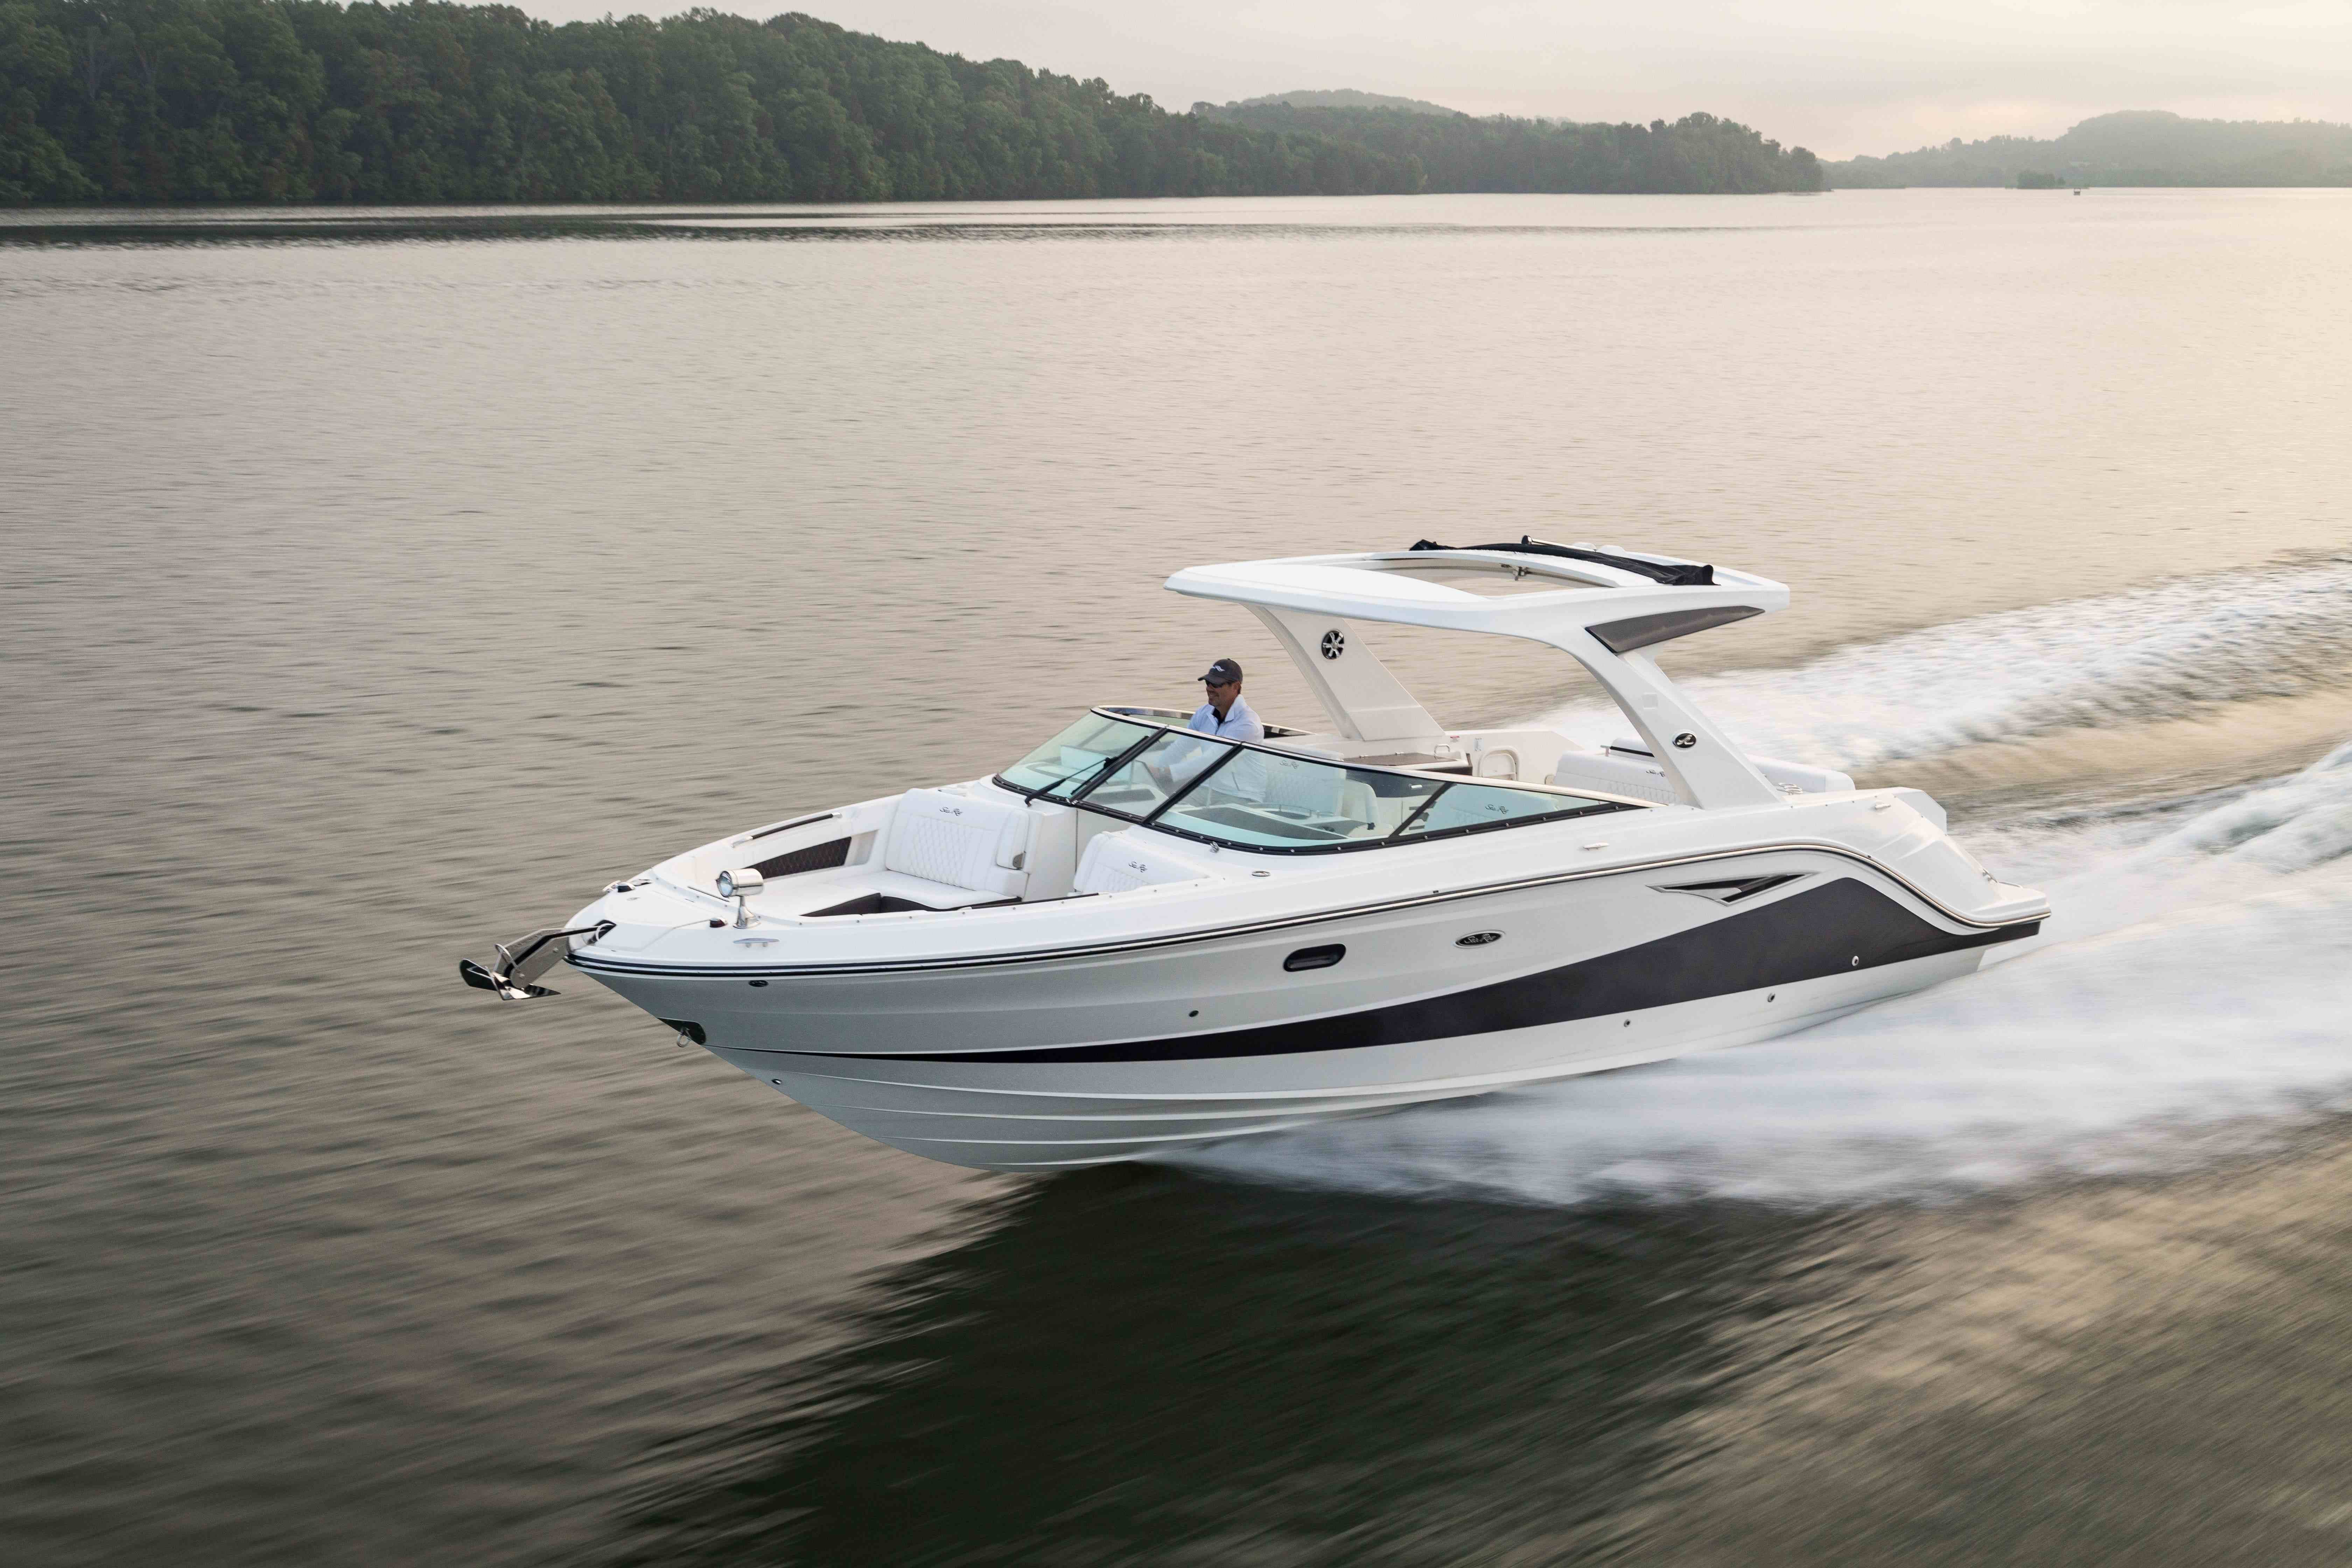 The new Sea Ray 310 SLX is ready for immediate delivery!